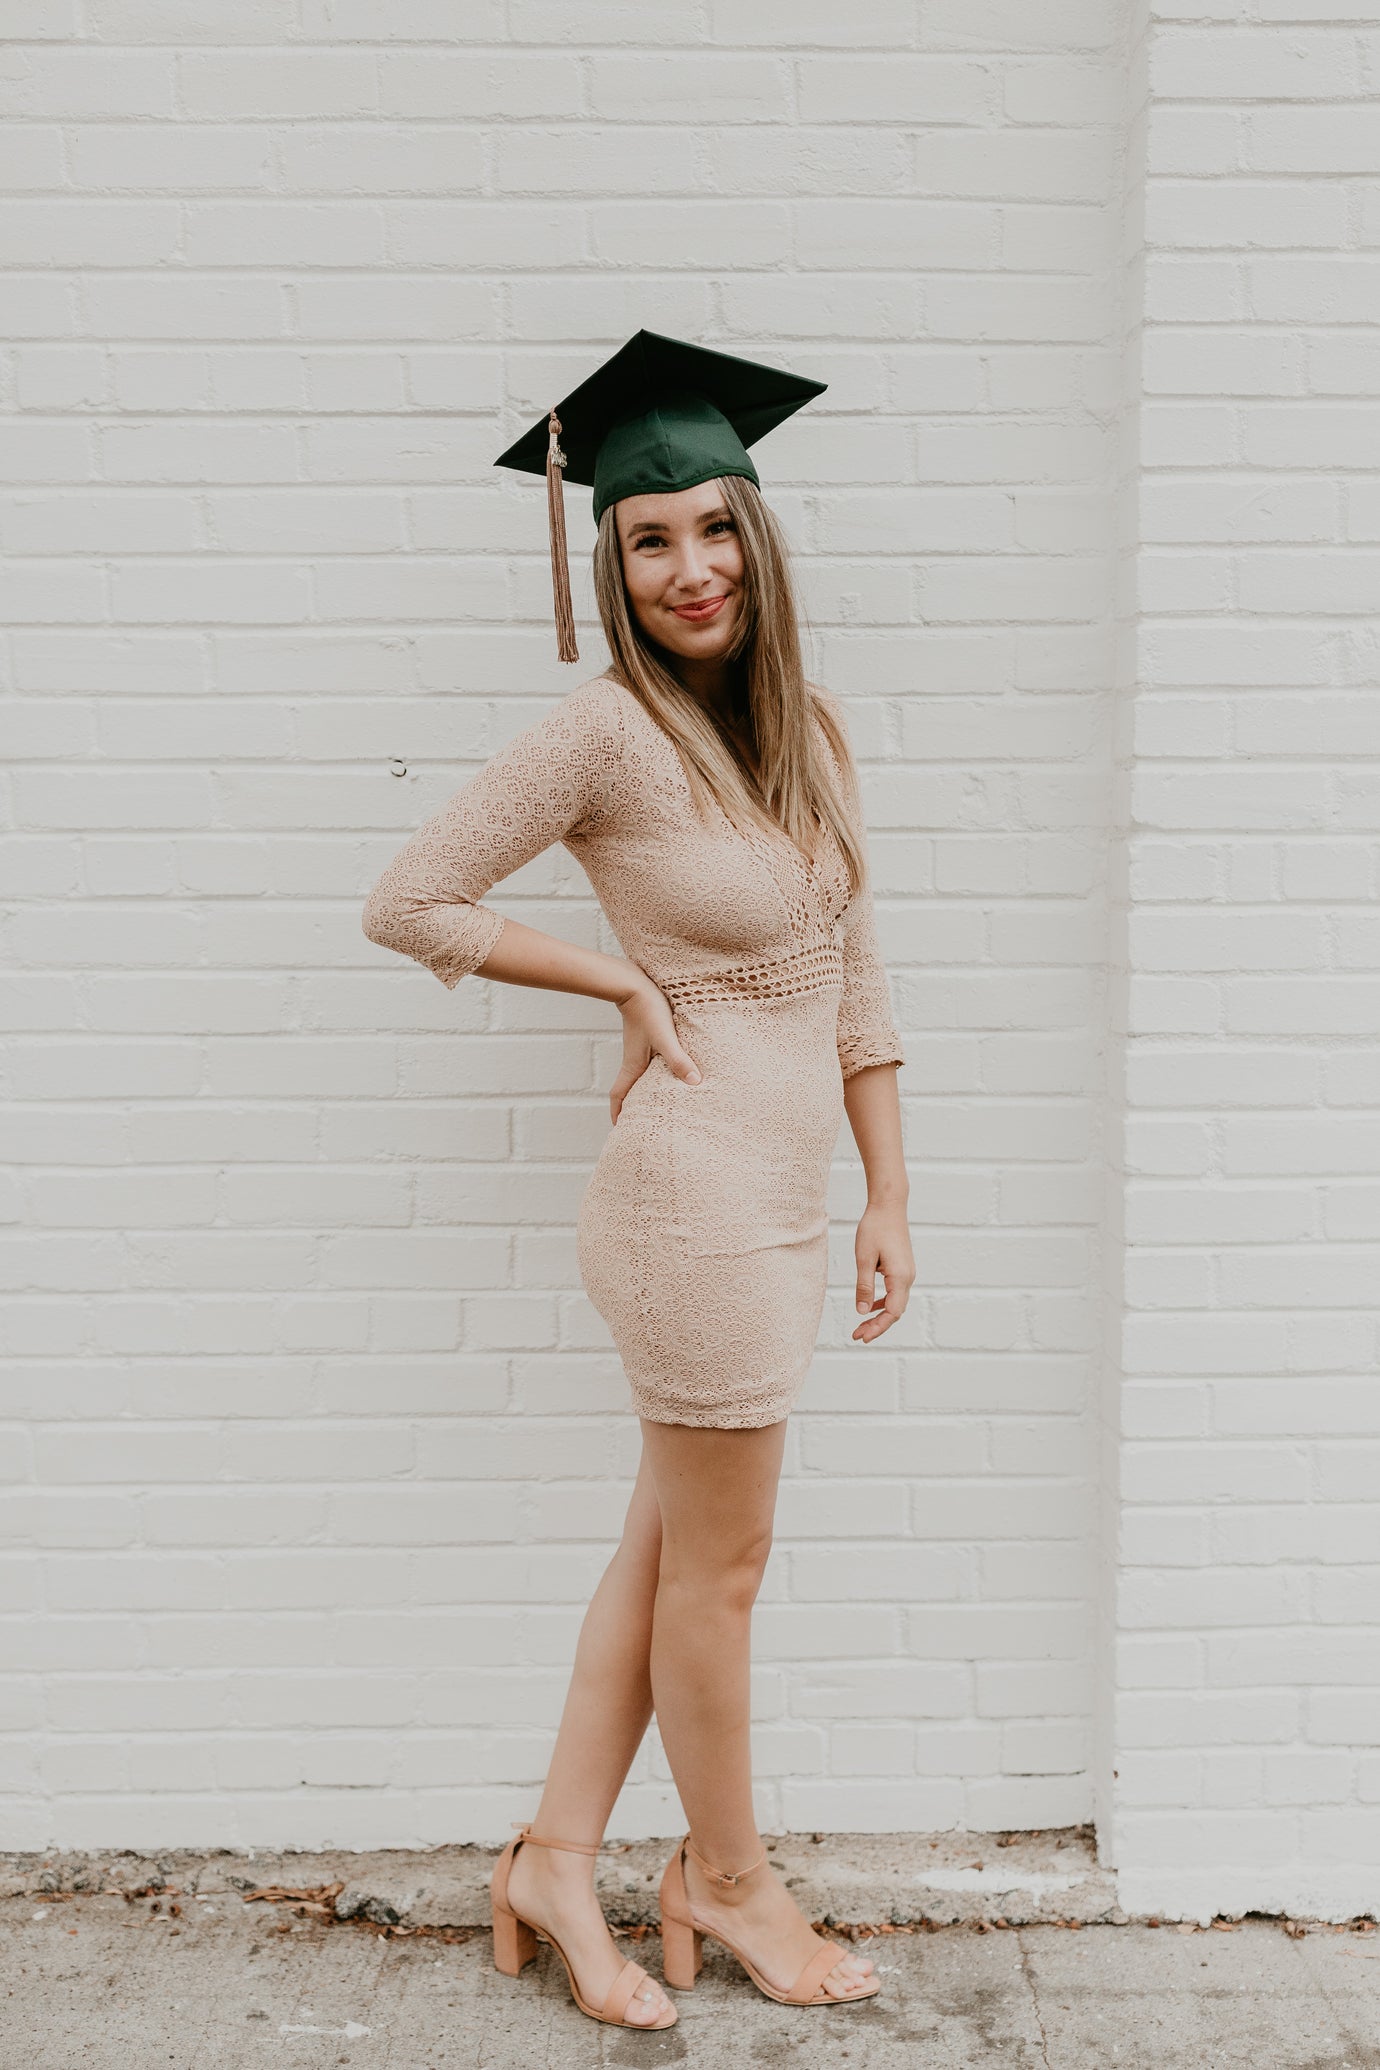 Toss Your Caps In Style! How To Dress For Your Graduation